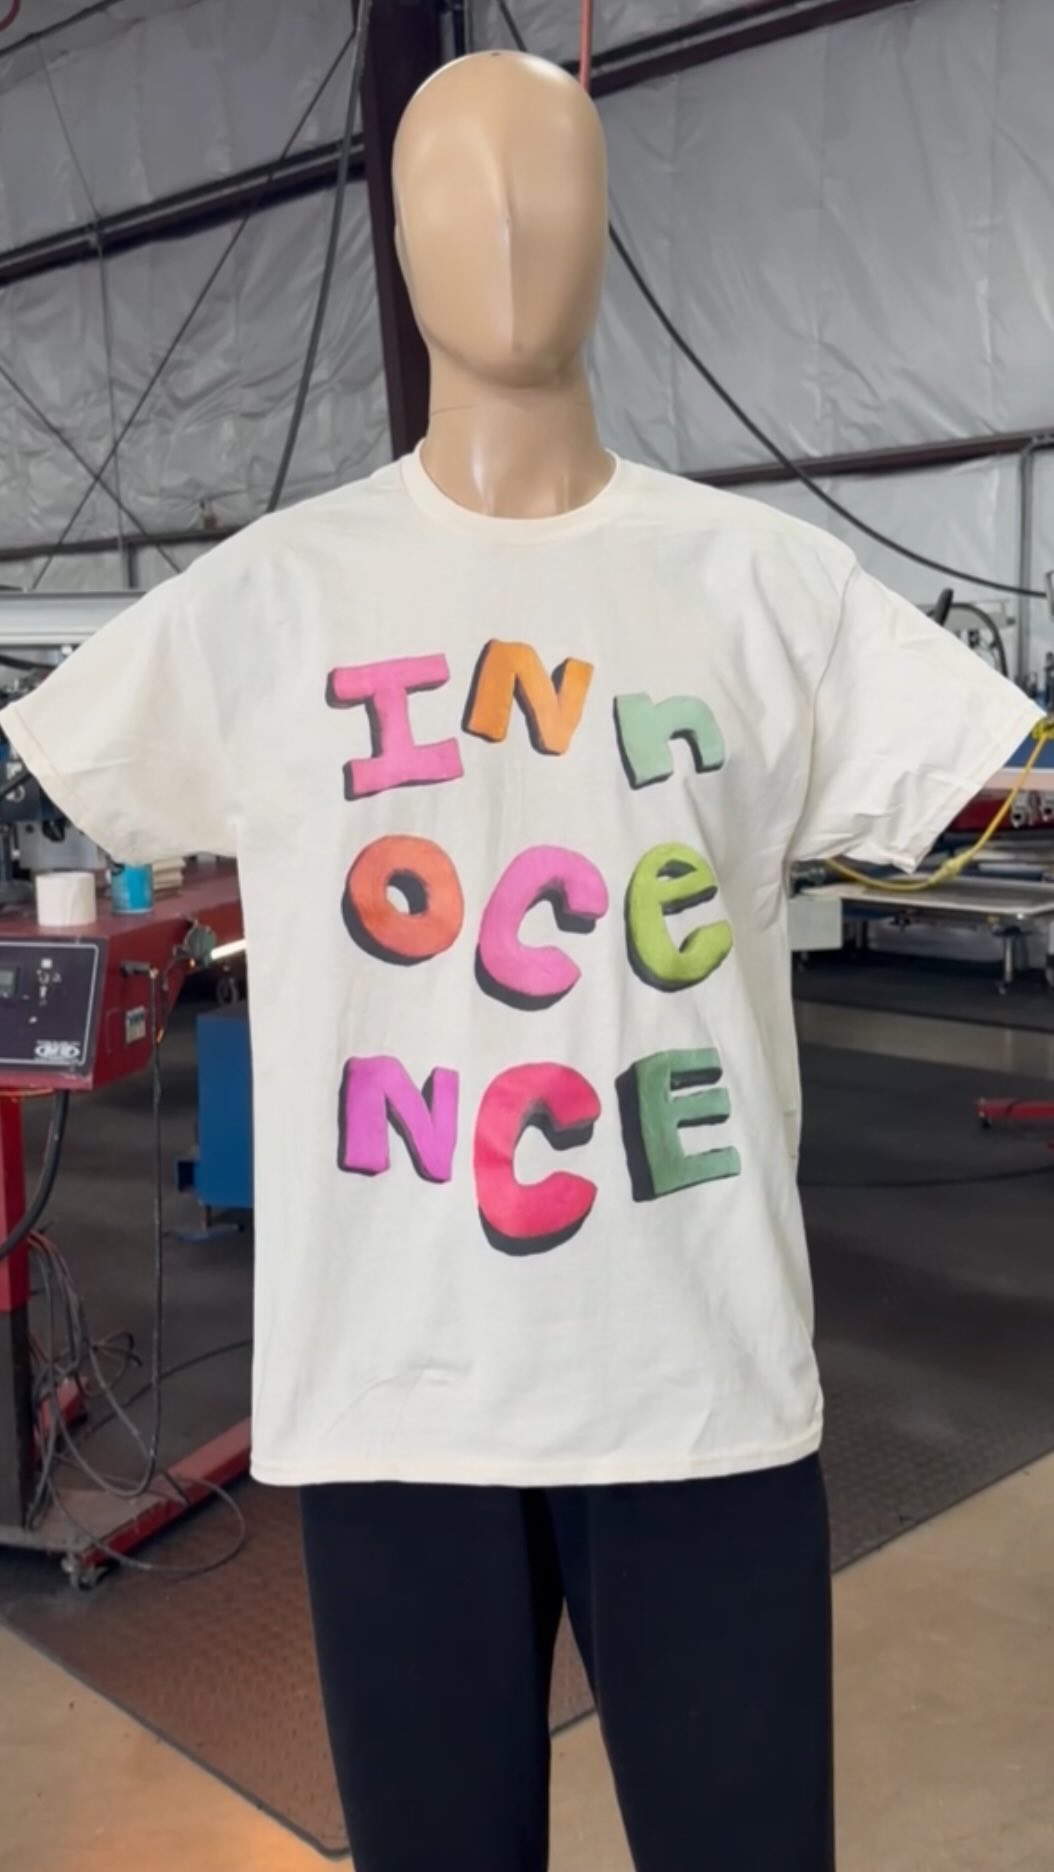 A mannequin displaying a white t-shirt with the word "innocence" printed in colorful, stylized letters.